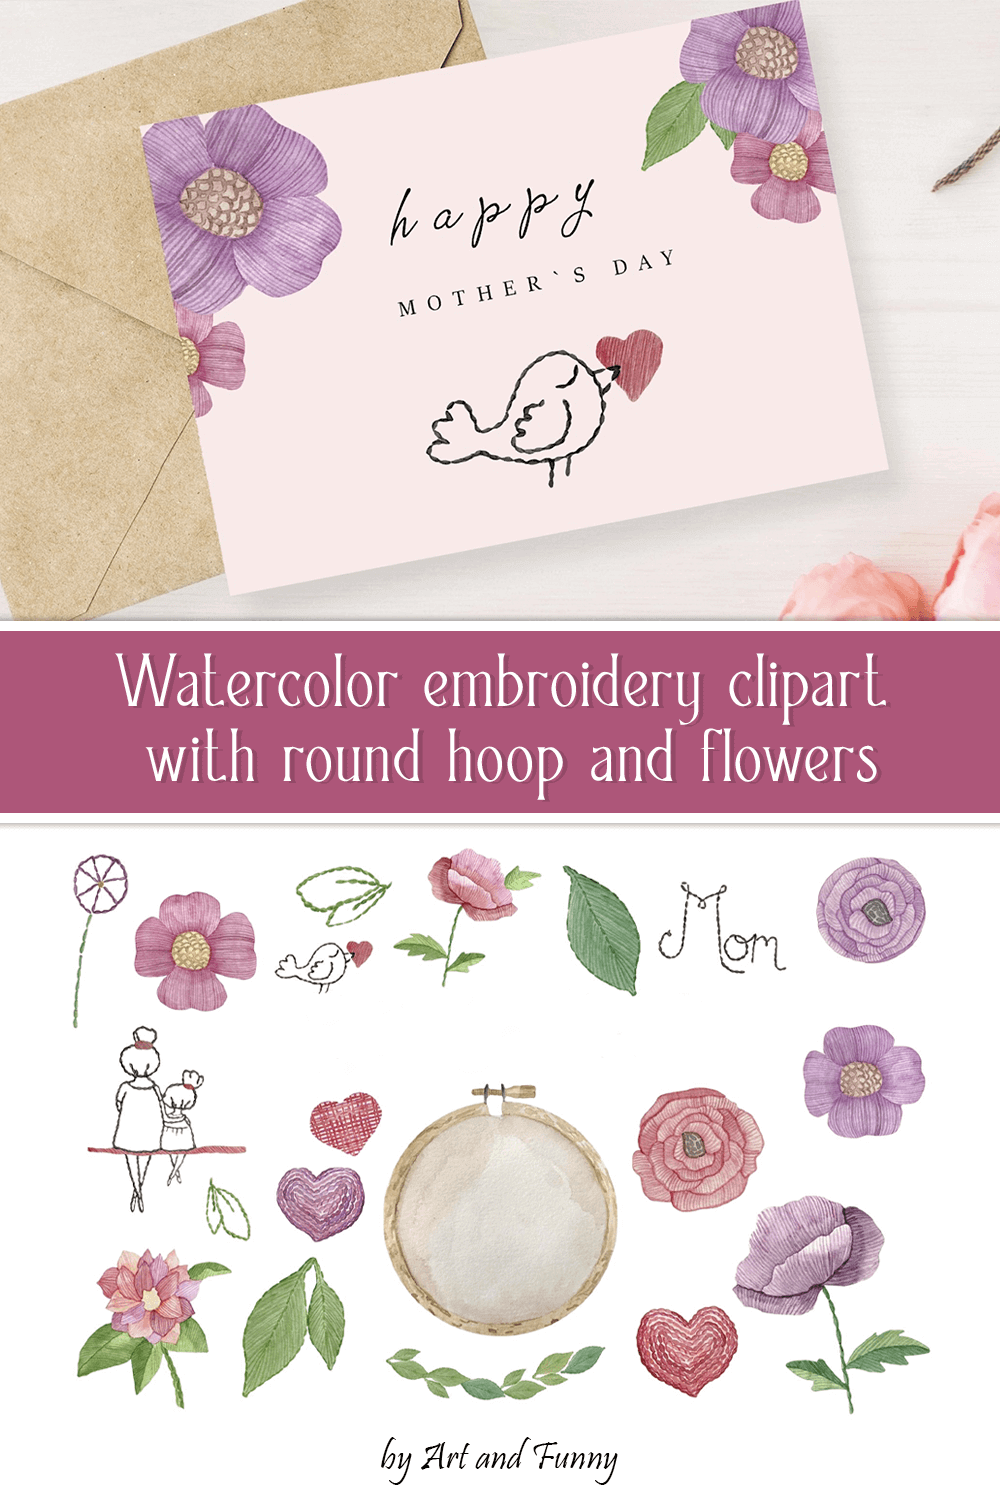 Cards with embroidery flowers and the inscription "Happy mother's day".